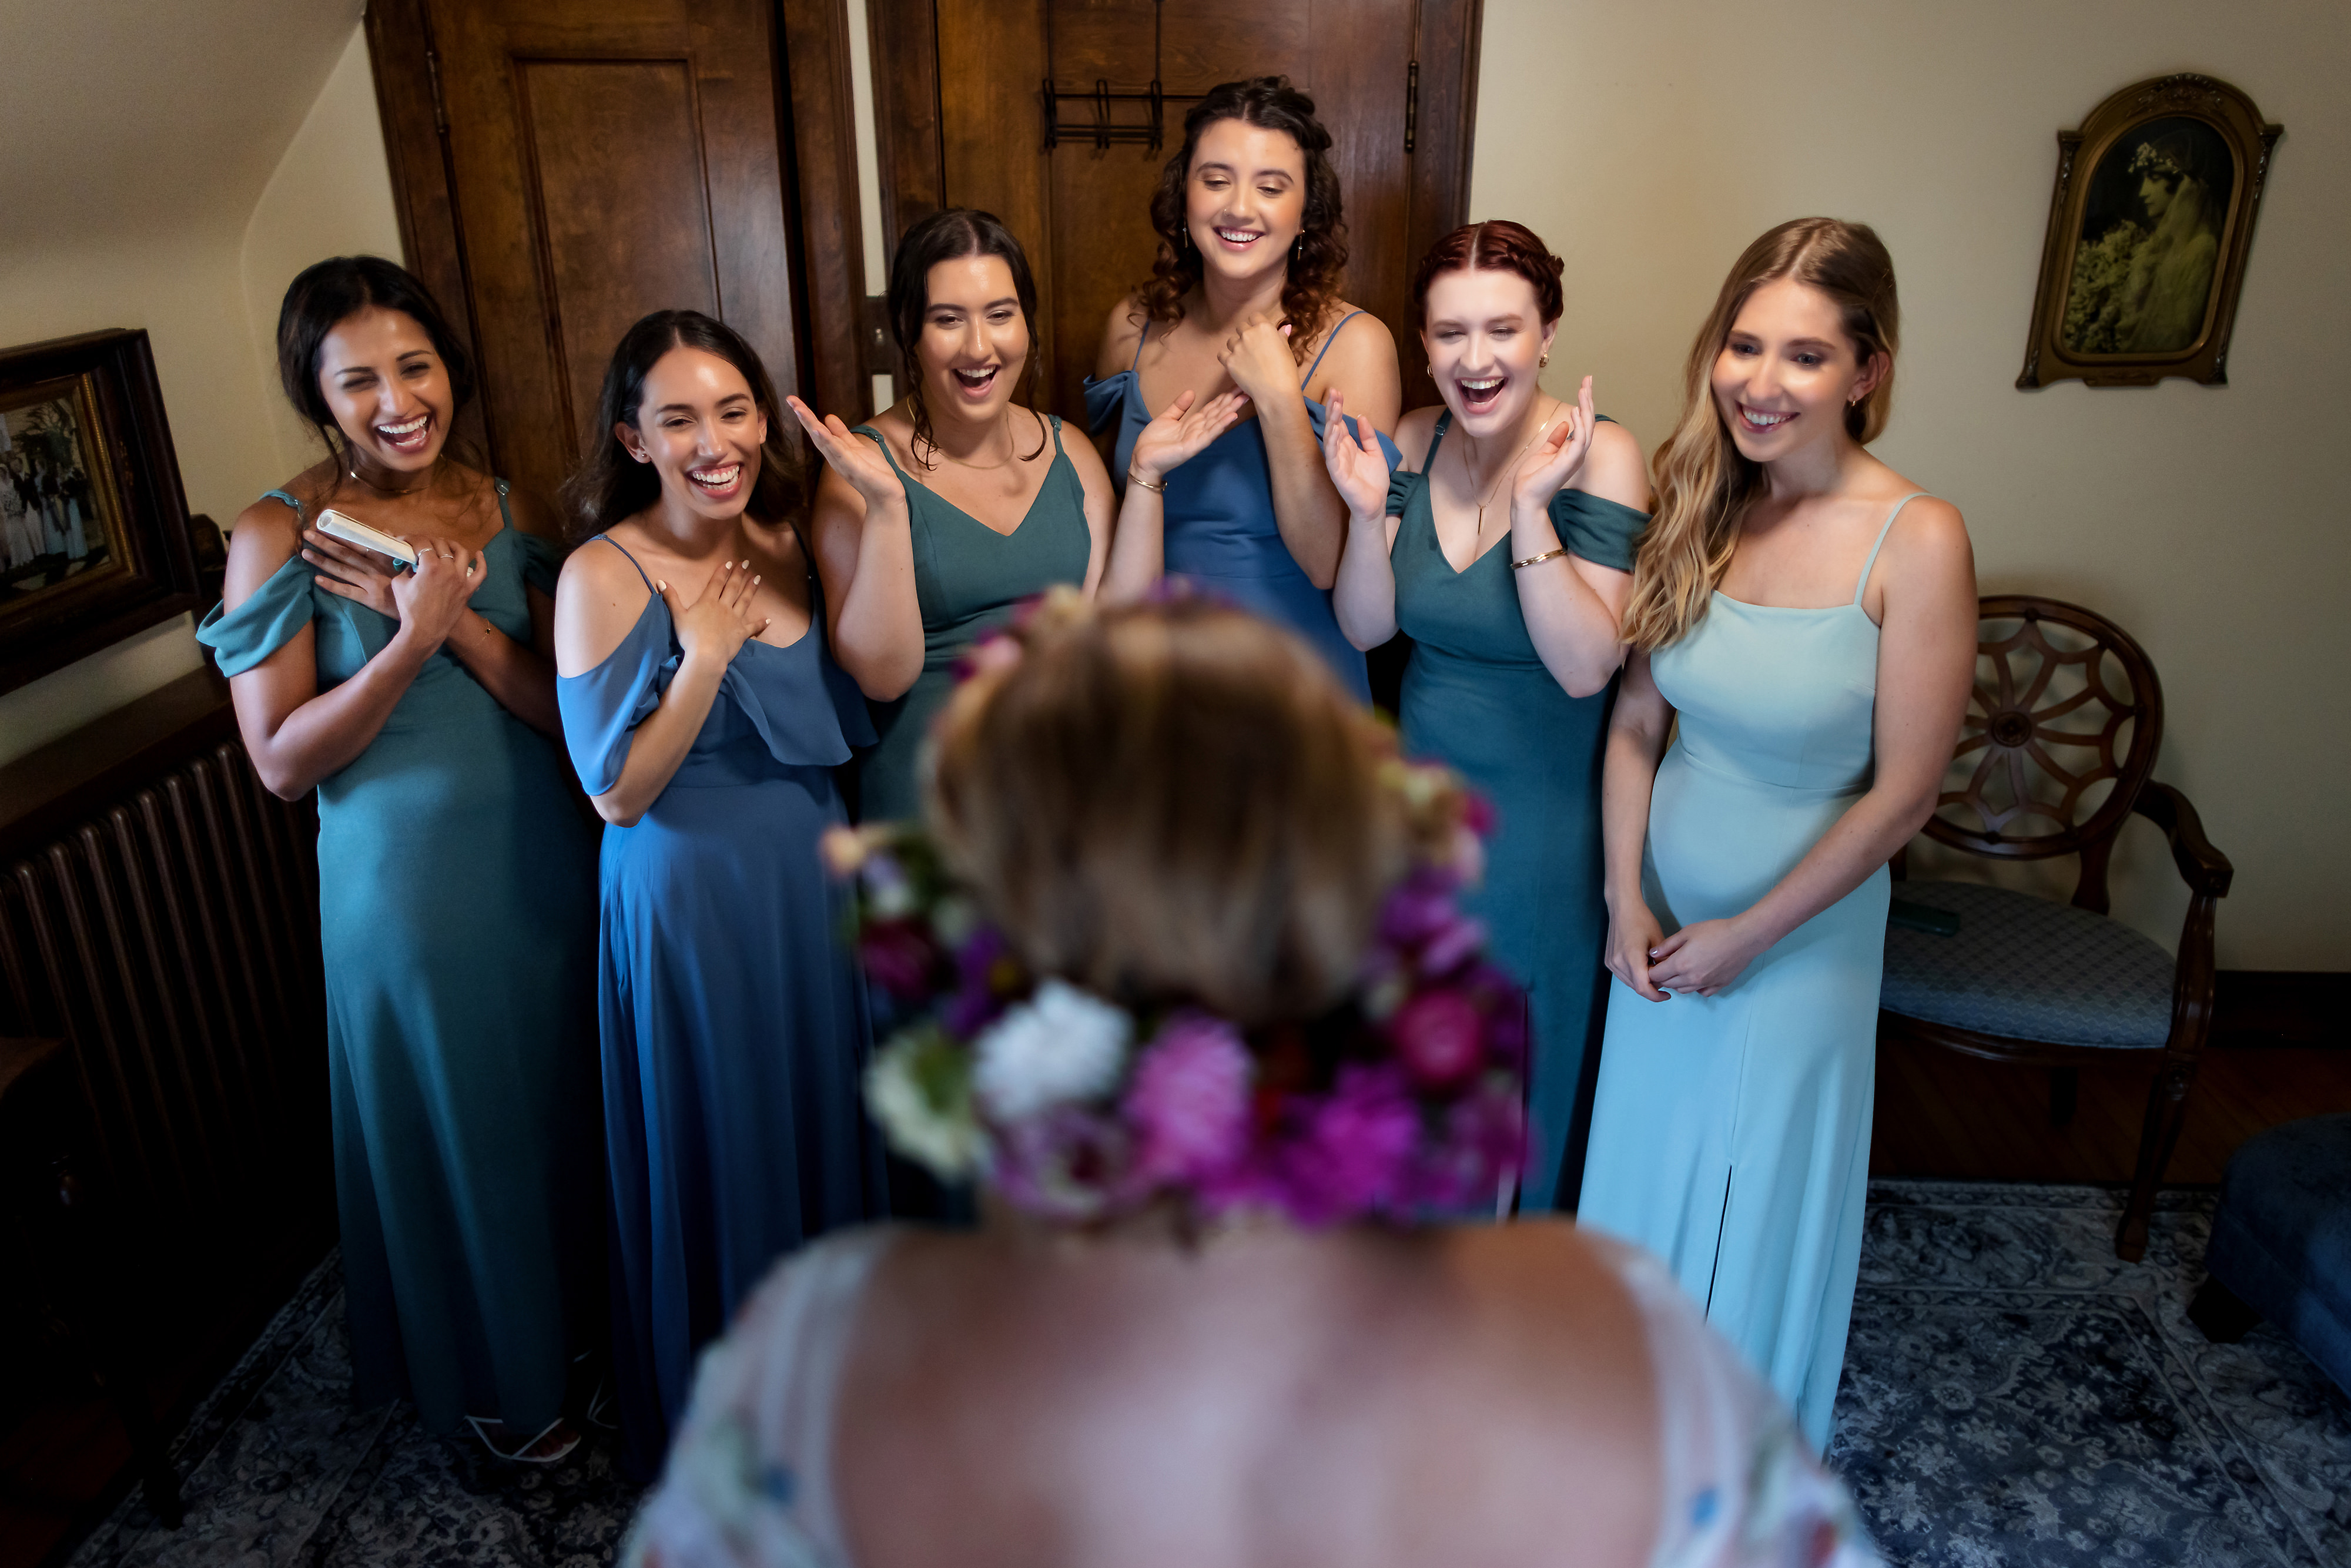 Bridesmaids react to seeing bride while getting ready for wedding at The Grove Redfield Estate in Glenview